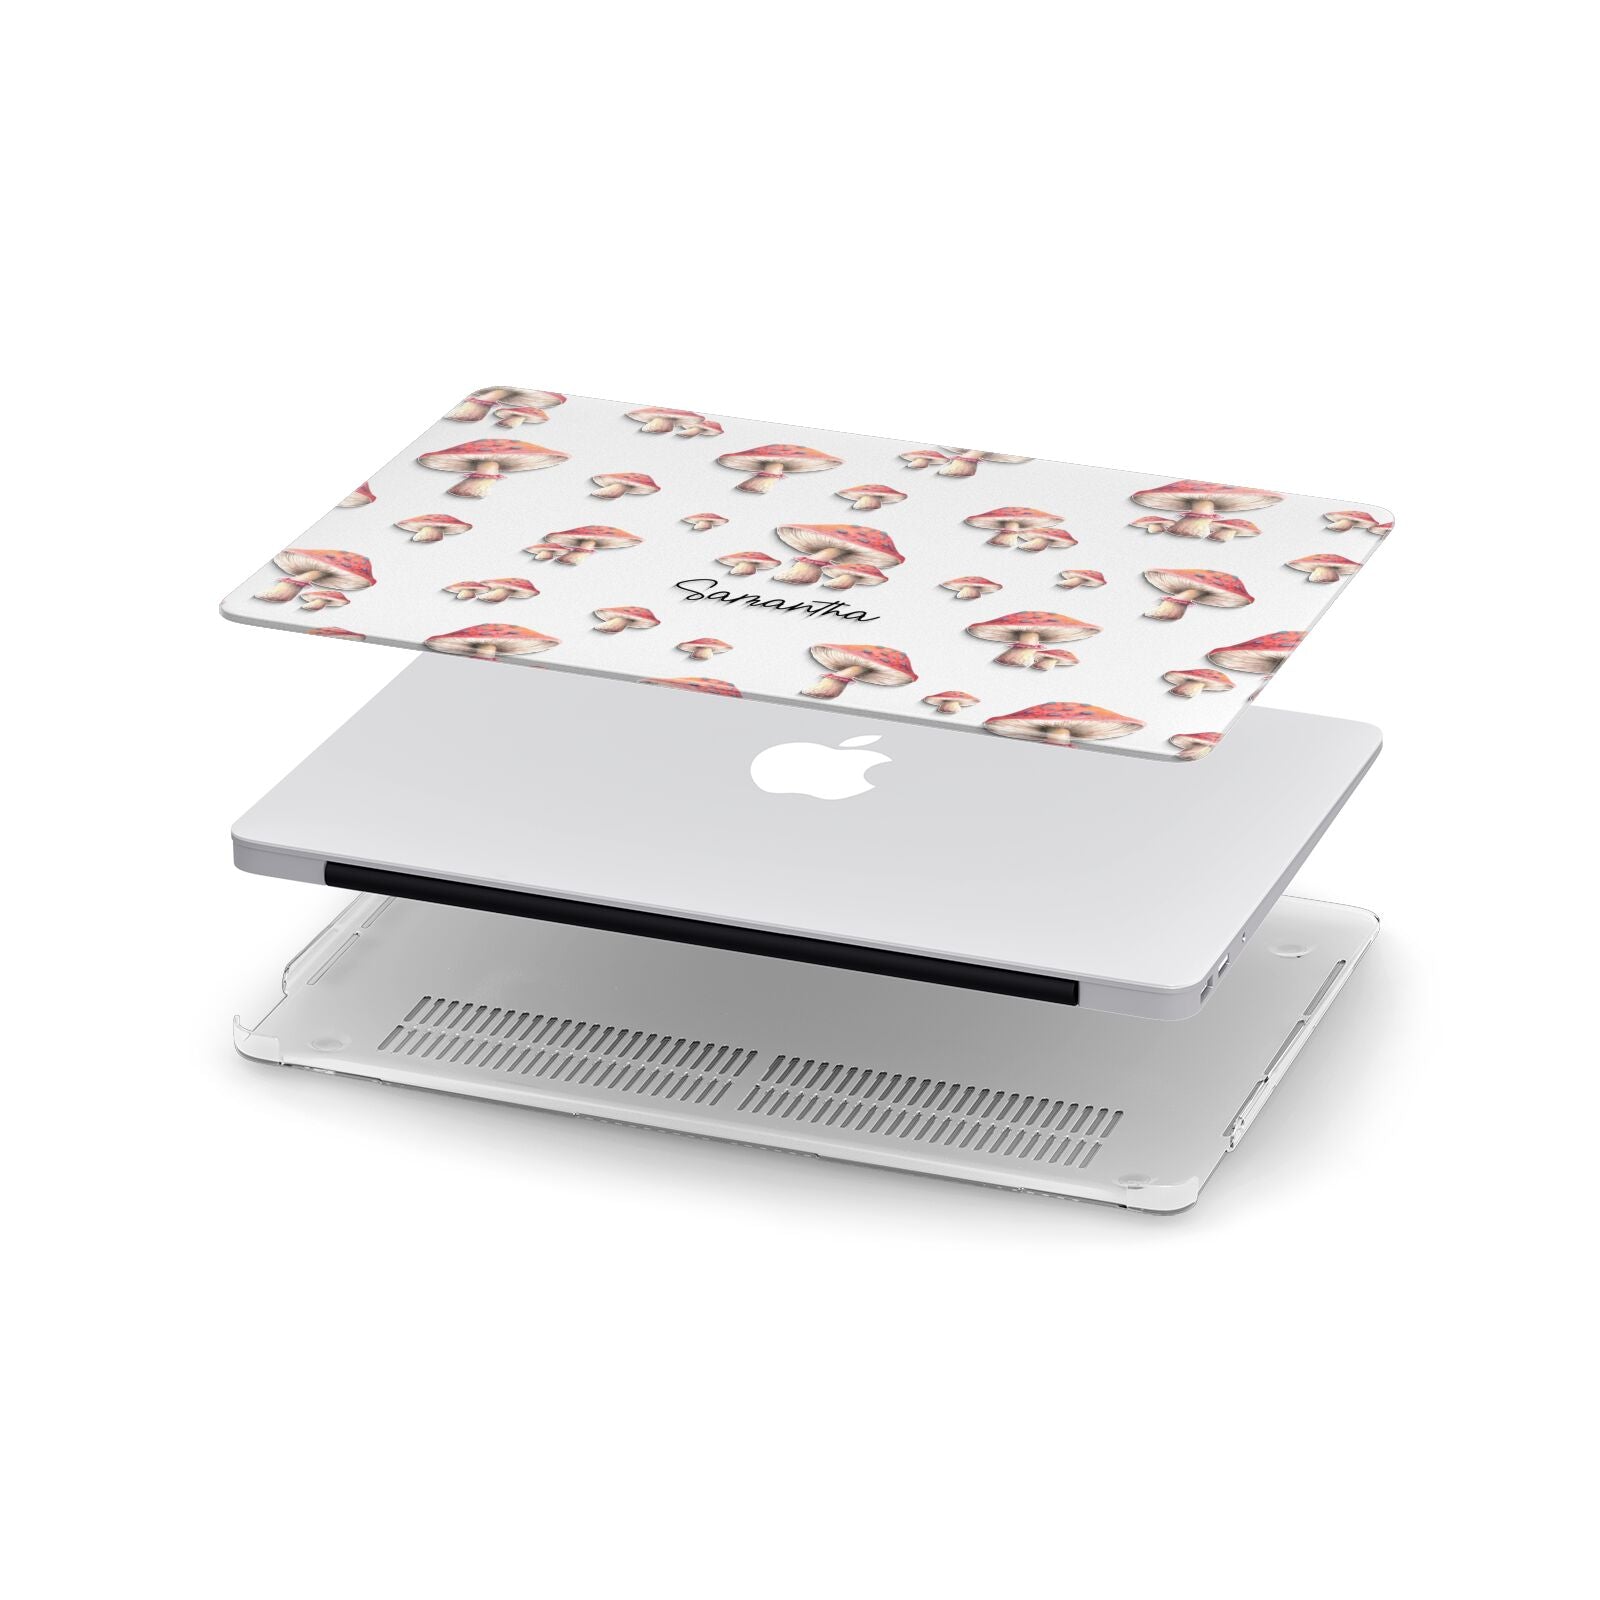 Mushroom Illustrations with Name Apple MacBook Case in Detail